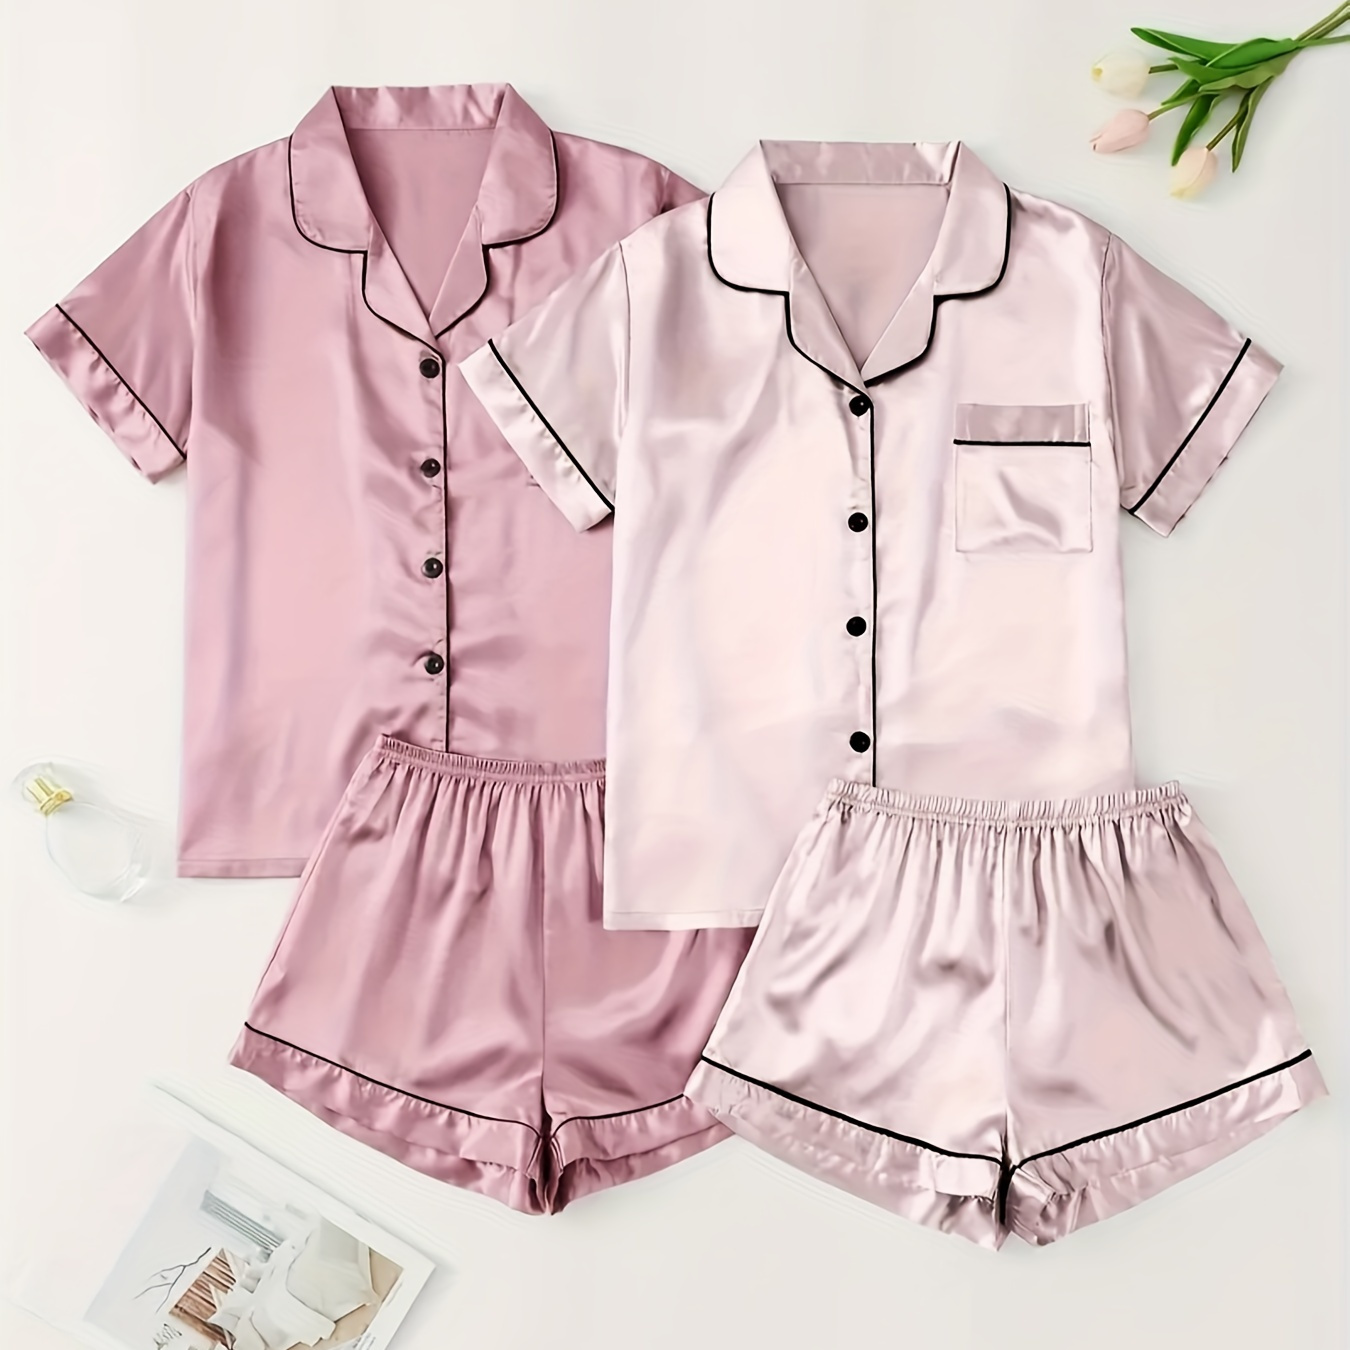 

Women's Sweatshirt Two-piece Set With Short Sleeves, Shorts, And Sweet Pajamas